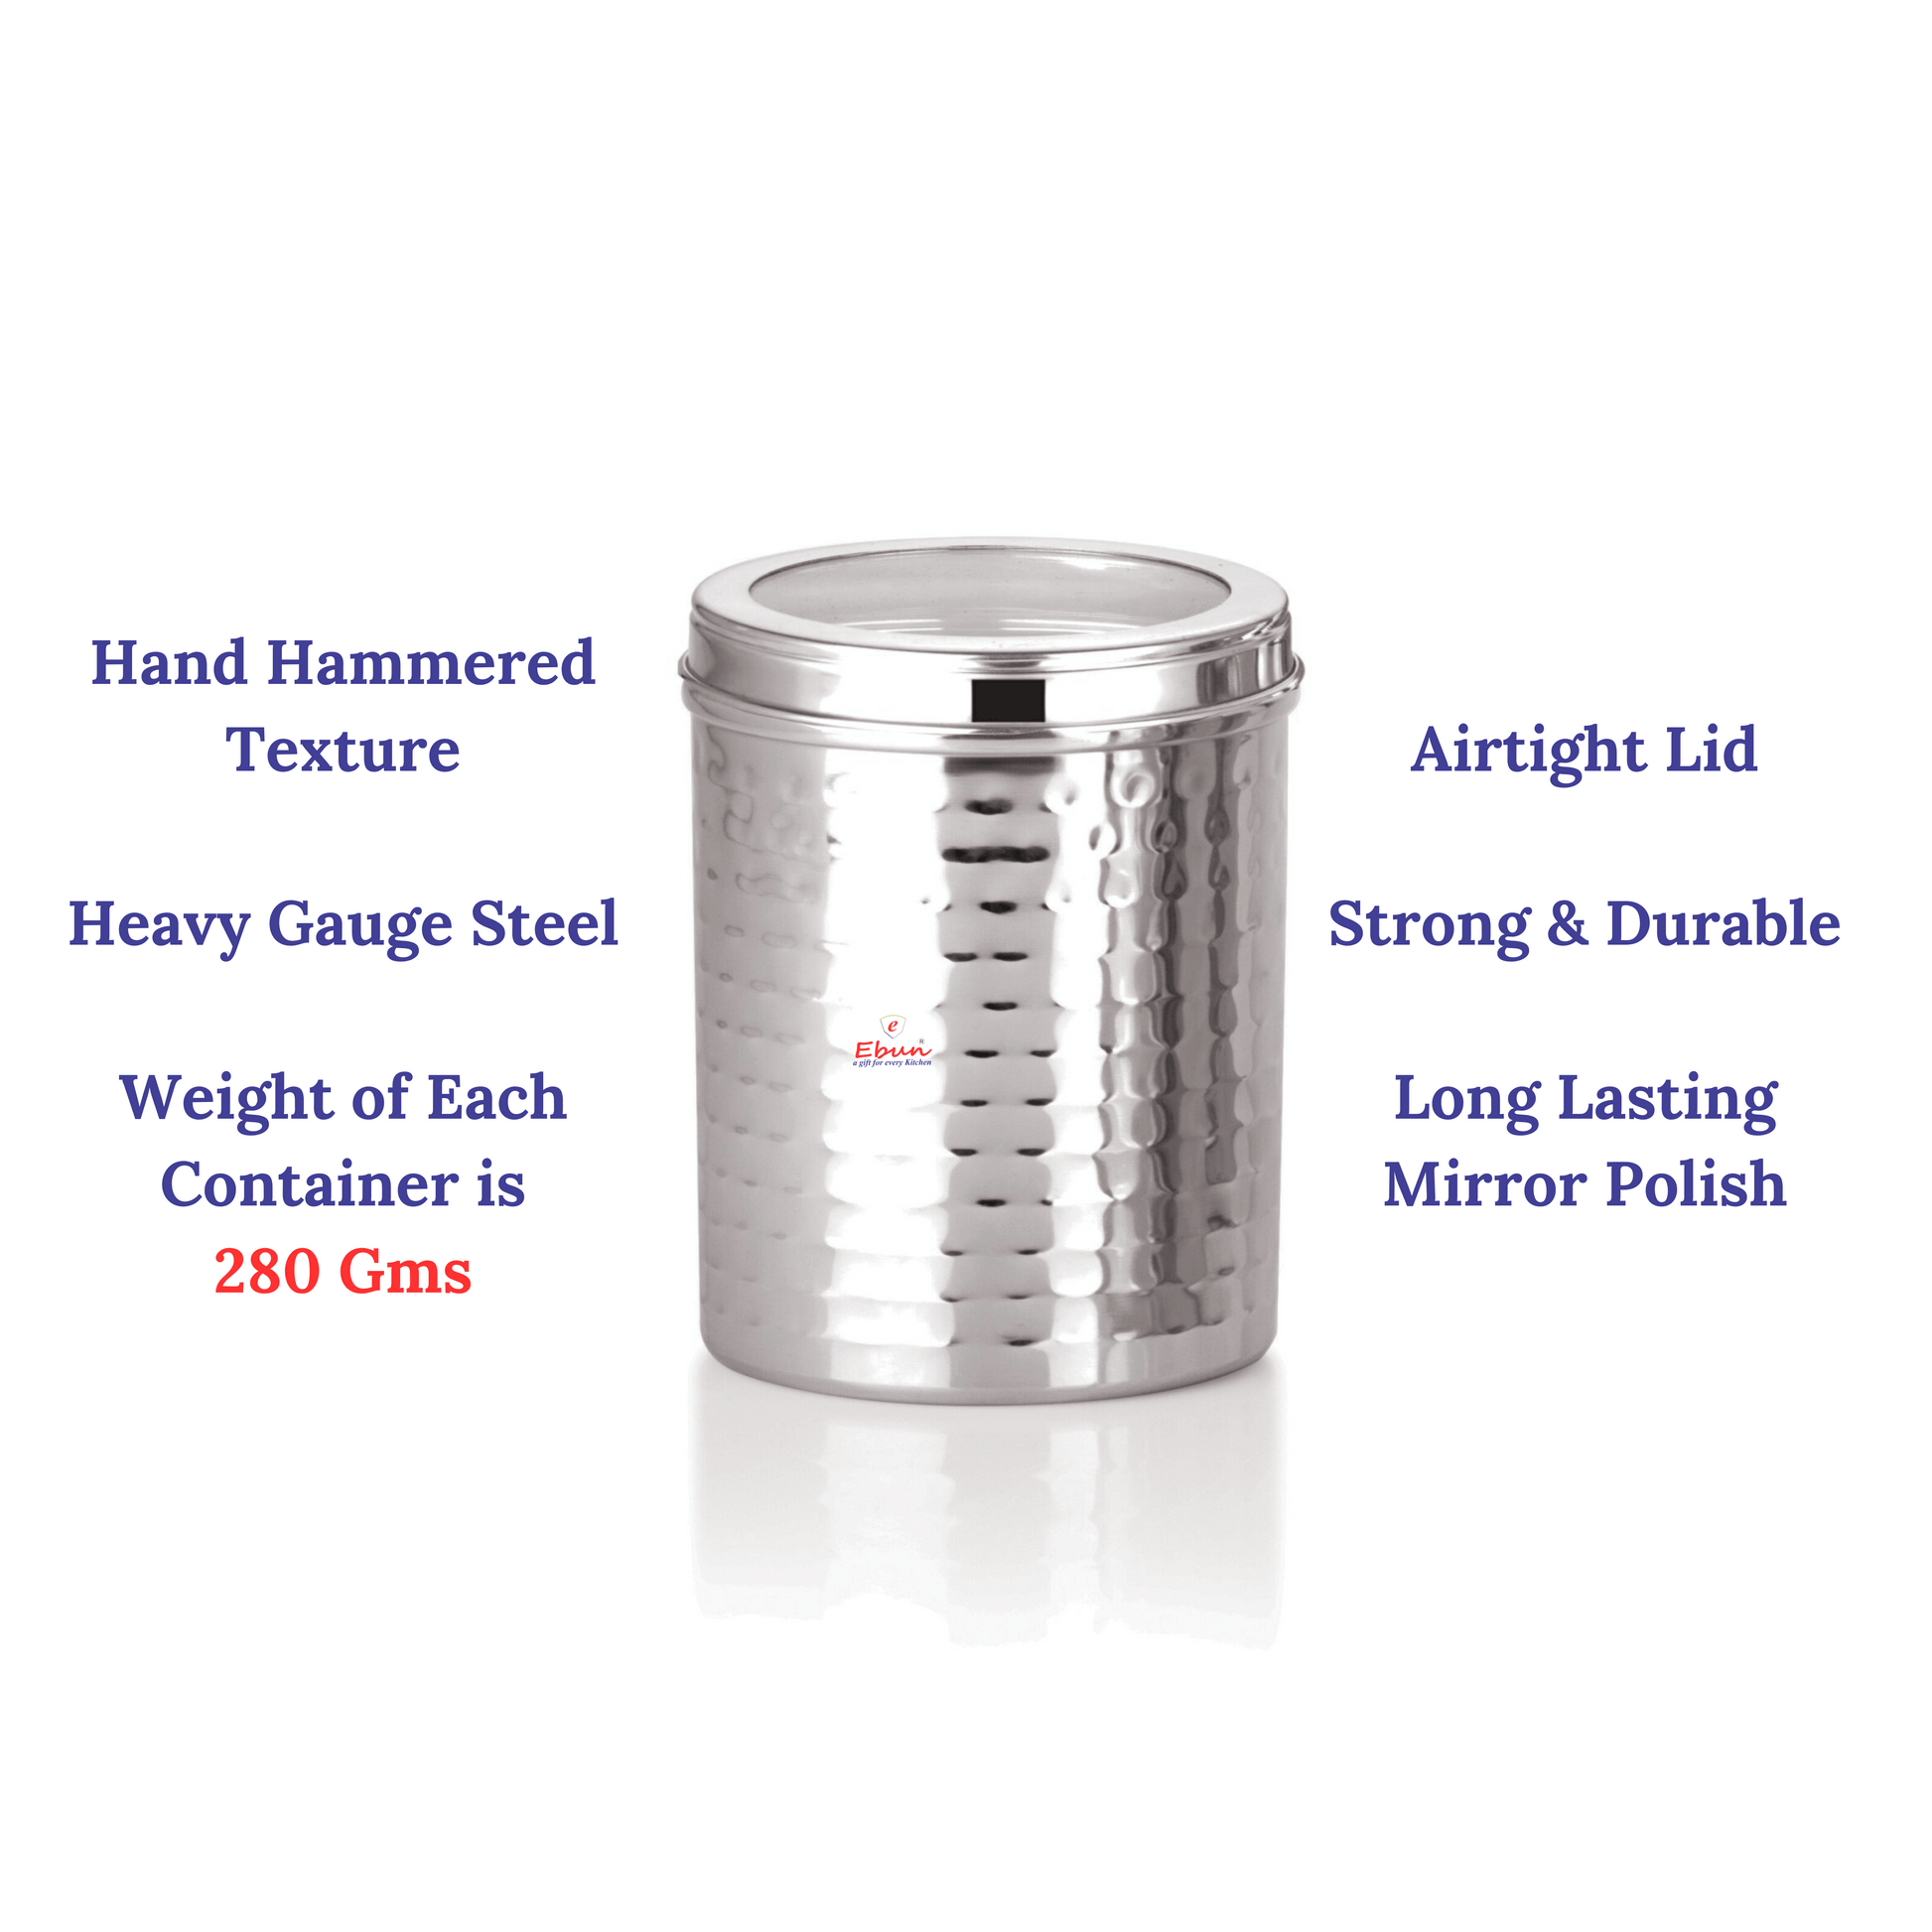 steel dabba | steel containers for kitchen 2kg | steel storage containers for fridge | square steel container | stainless steel airtight container | steel container set | steel containers with lid | kitchen storage containers set steel | airtight steel containers | container for kitchen storage set steel